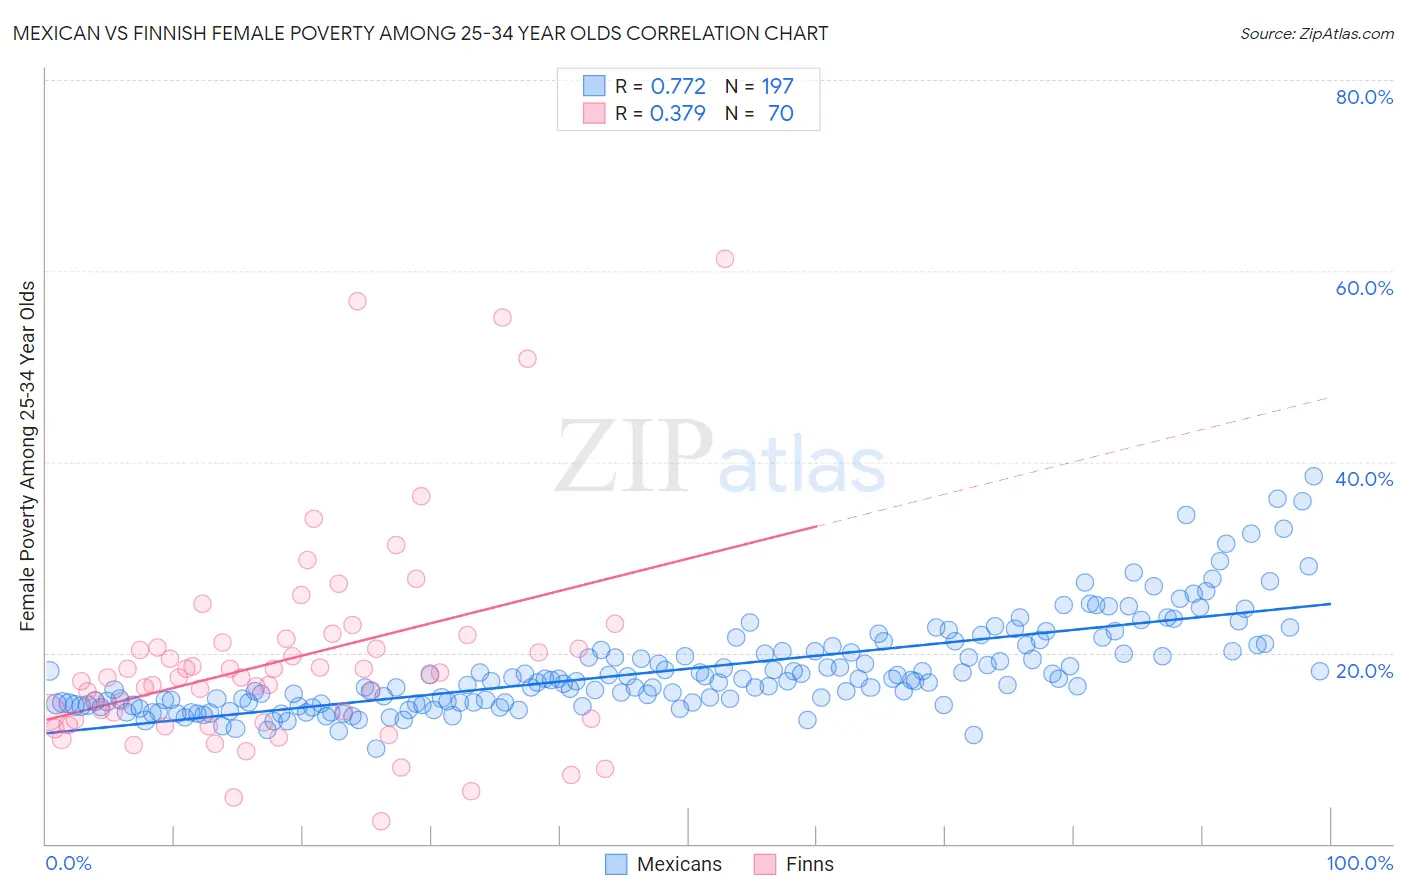 Mexican vs Finnish Female Poverty Among 25-34 Year Olds